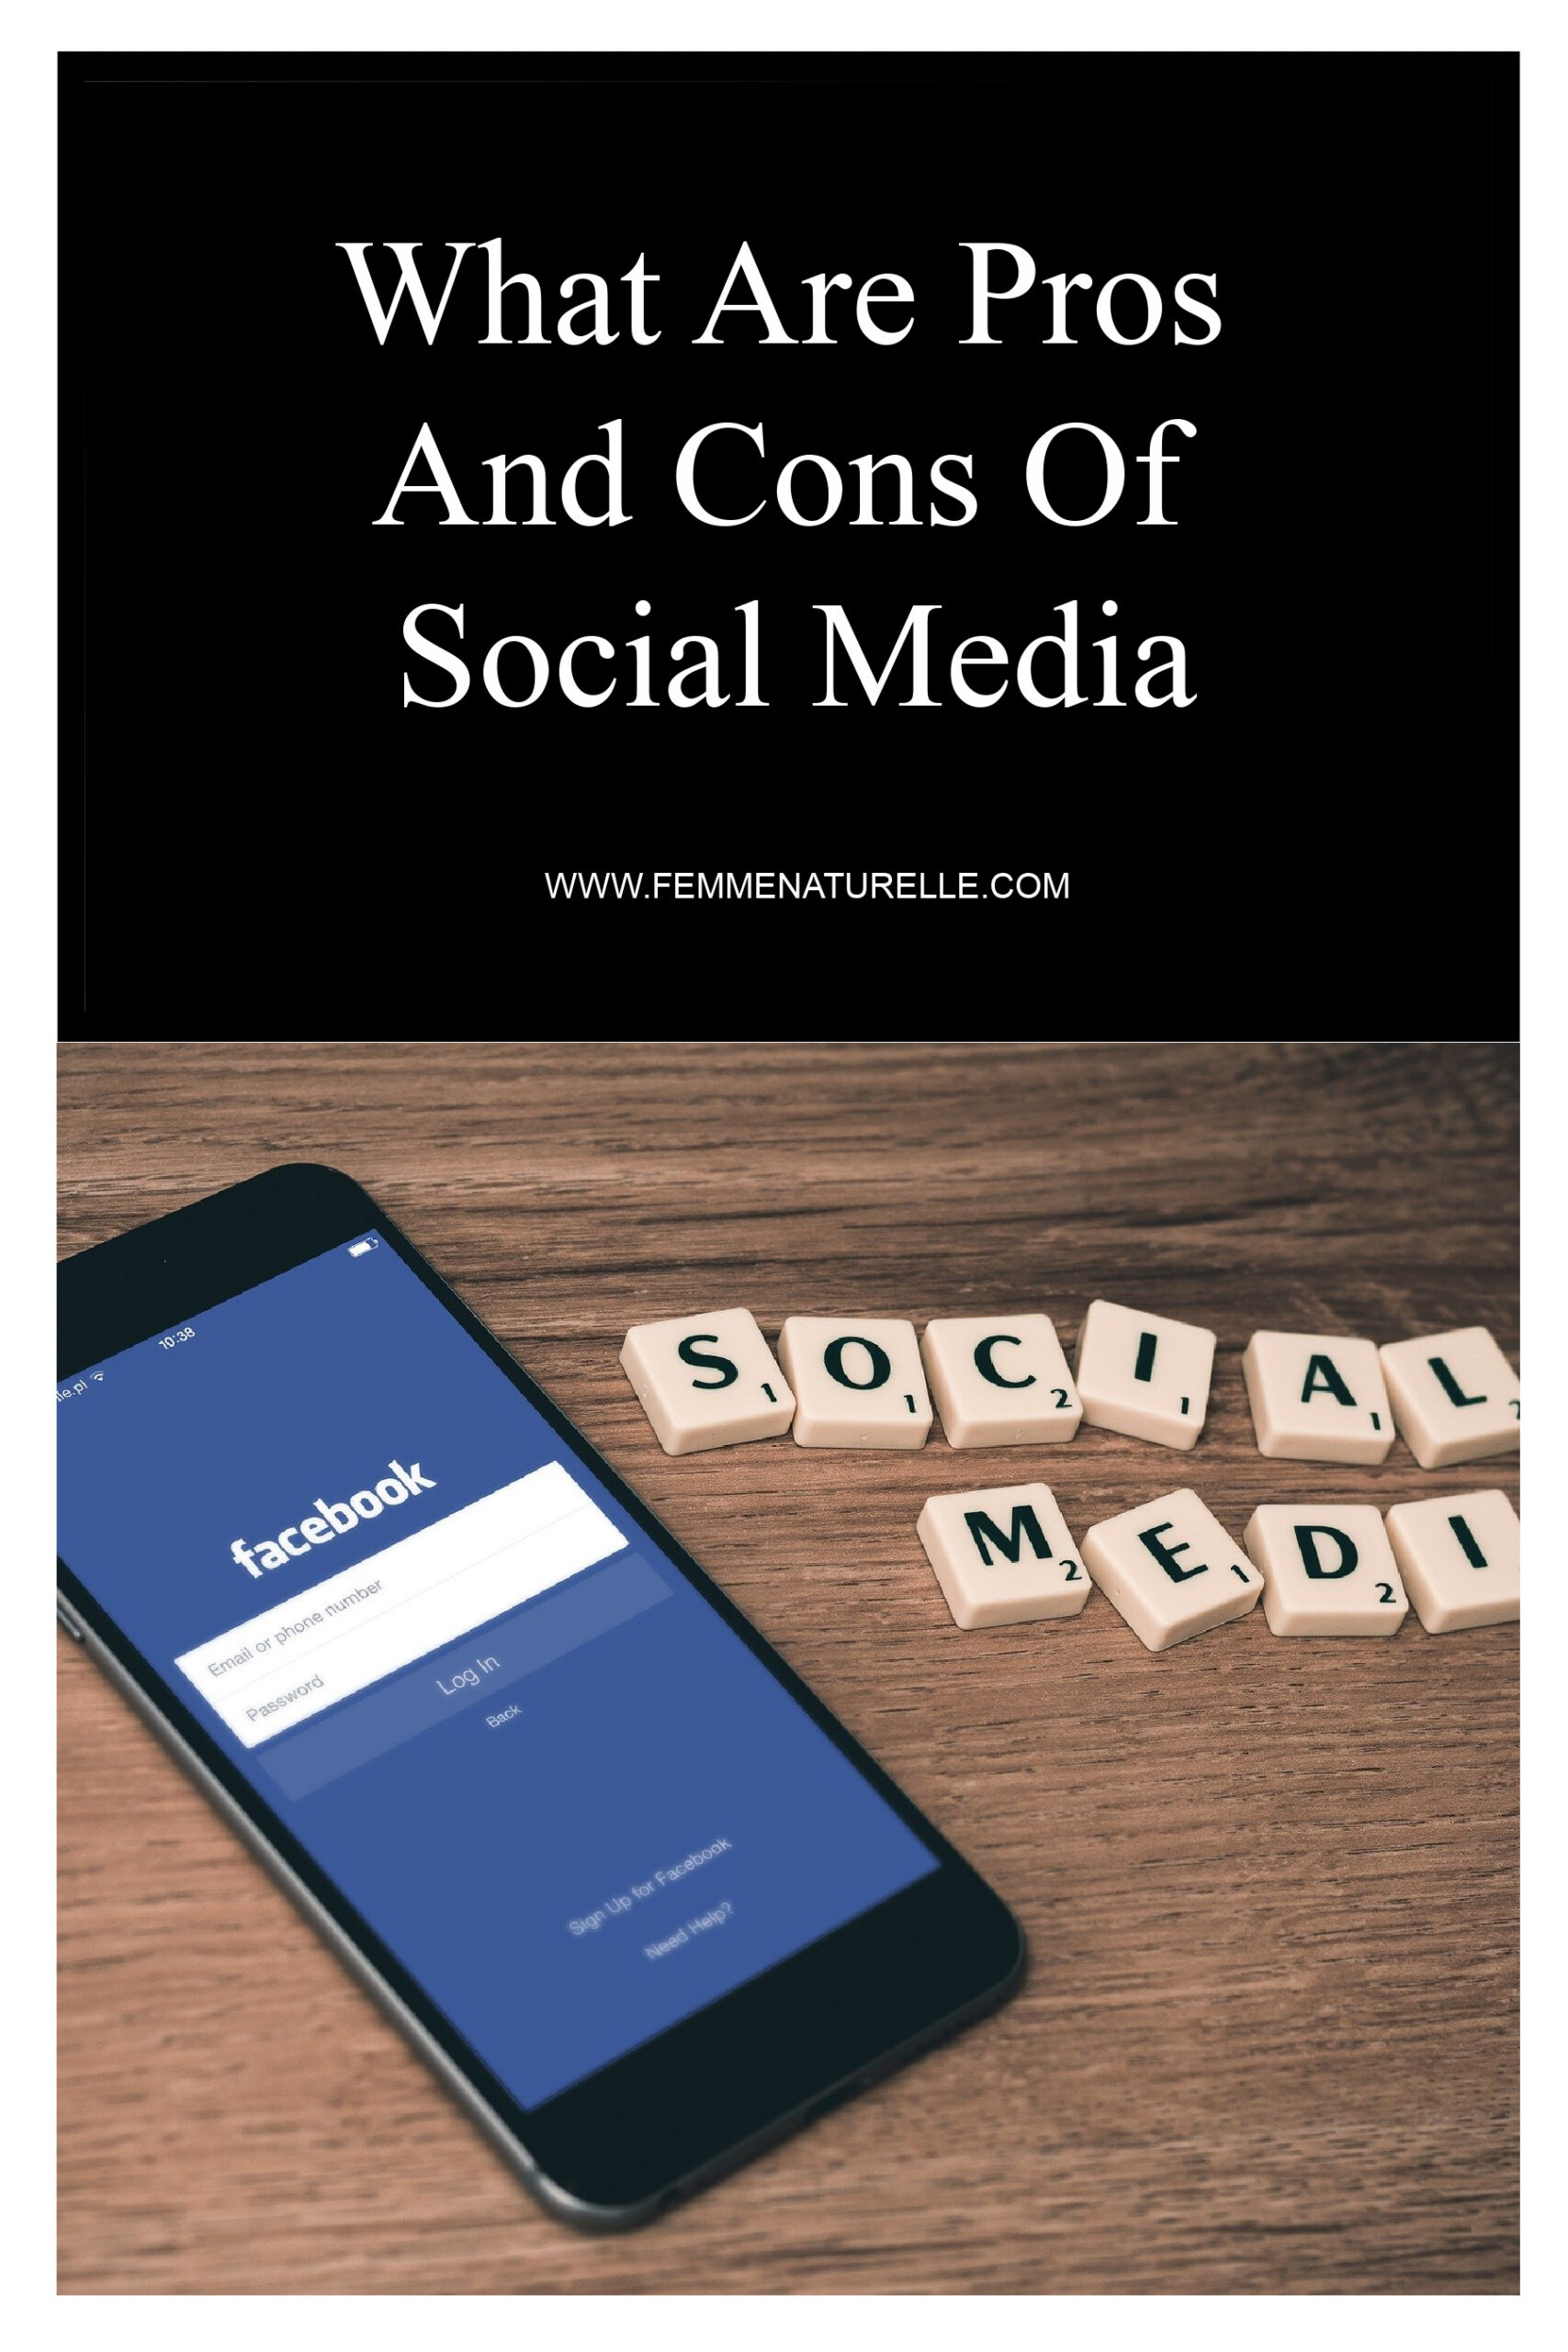 What Are Pros And Cons Of Social Media